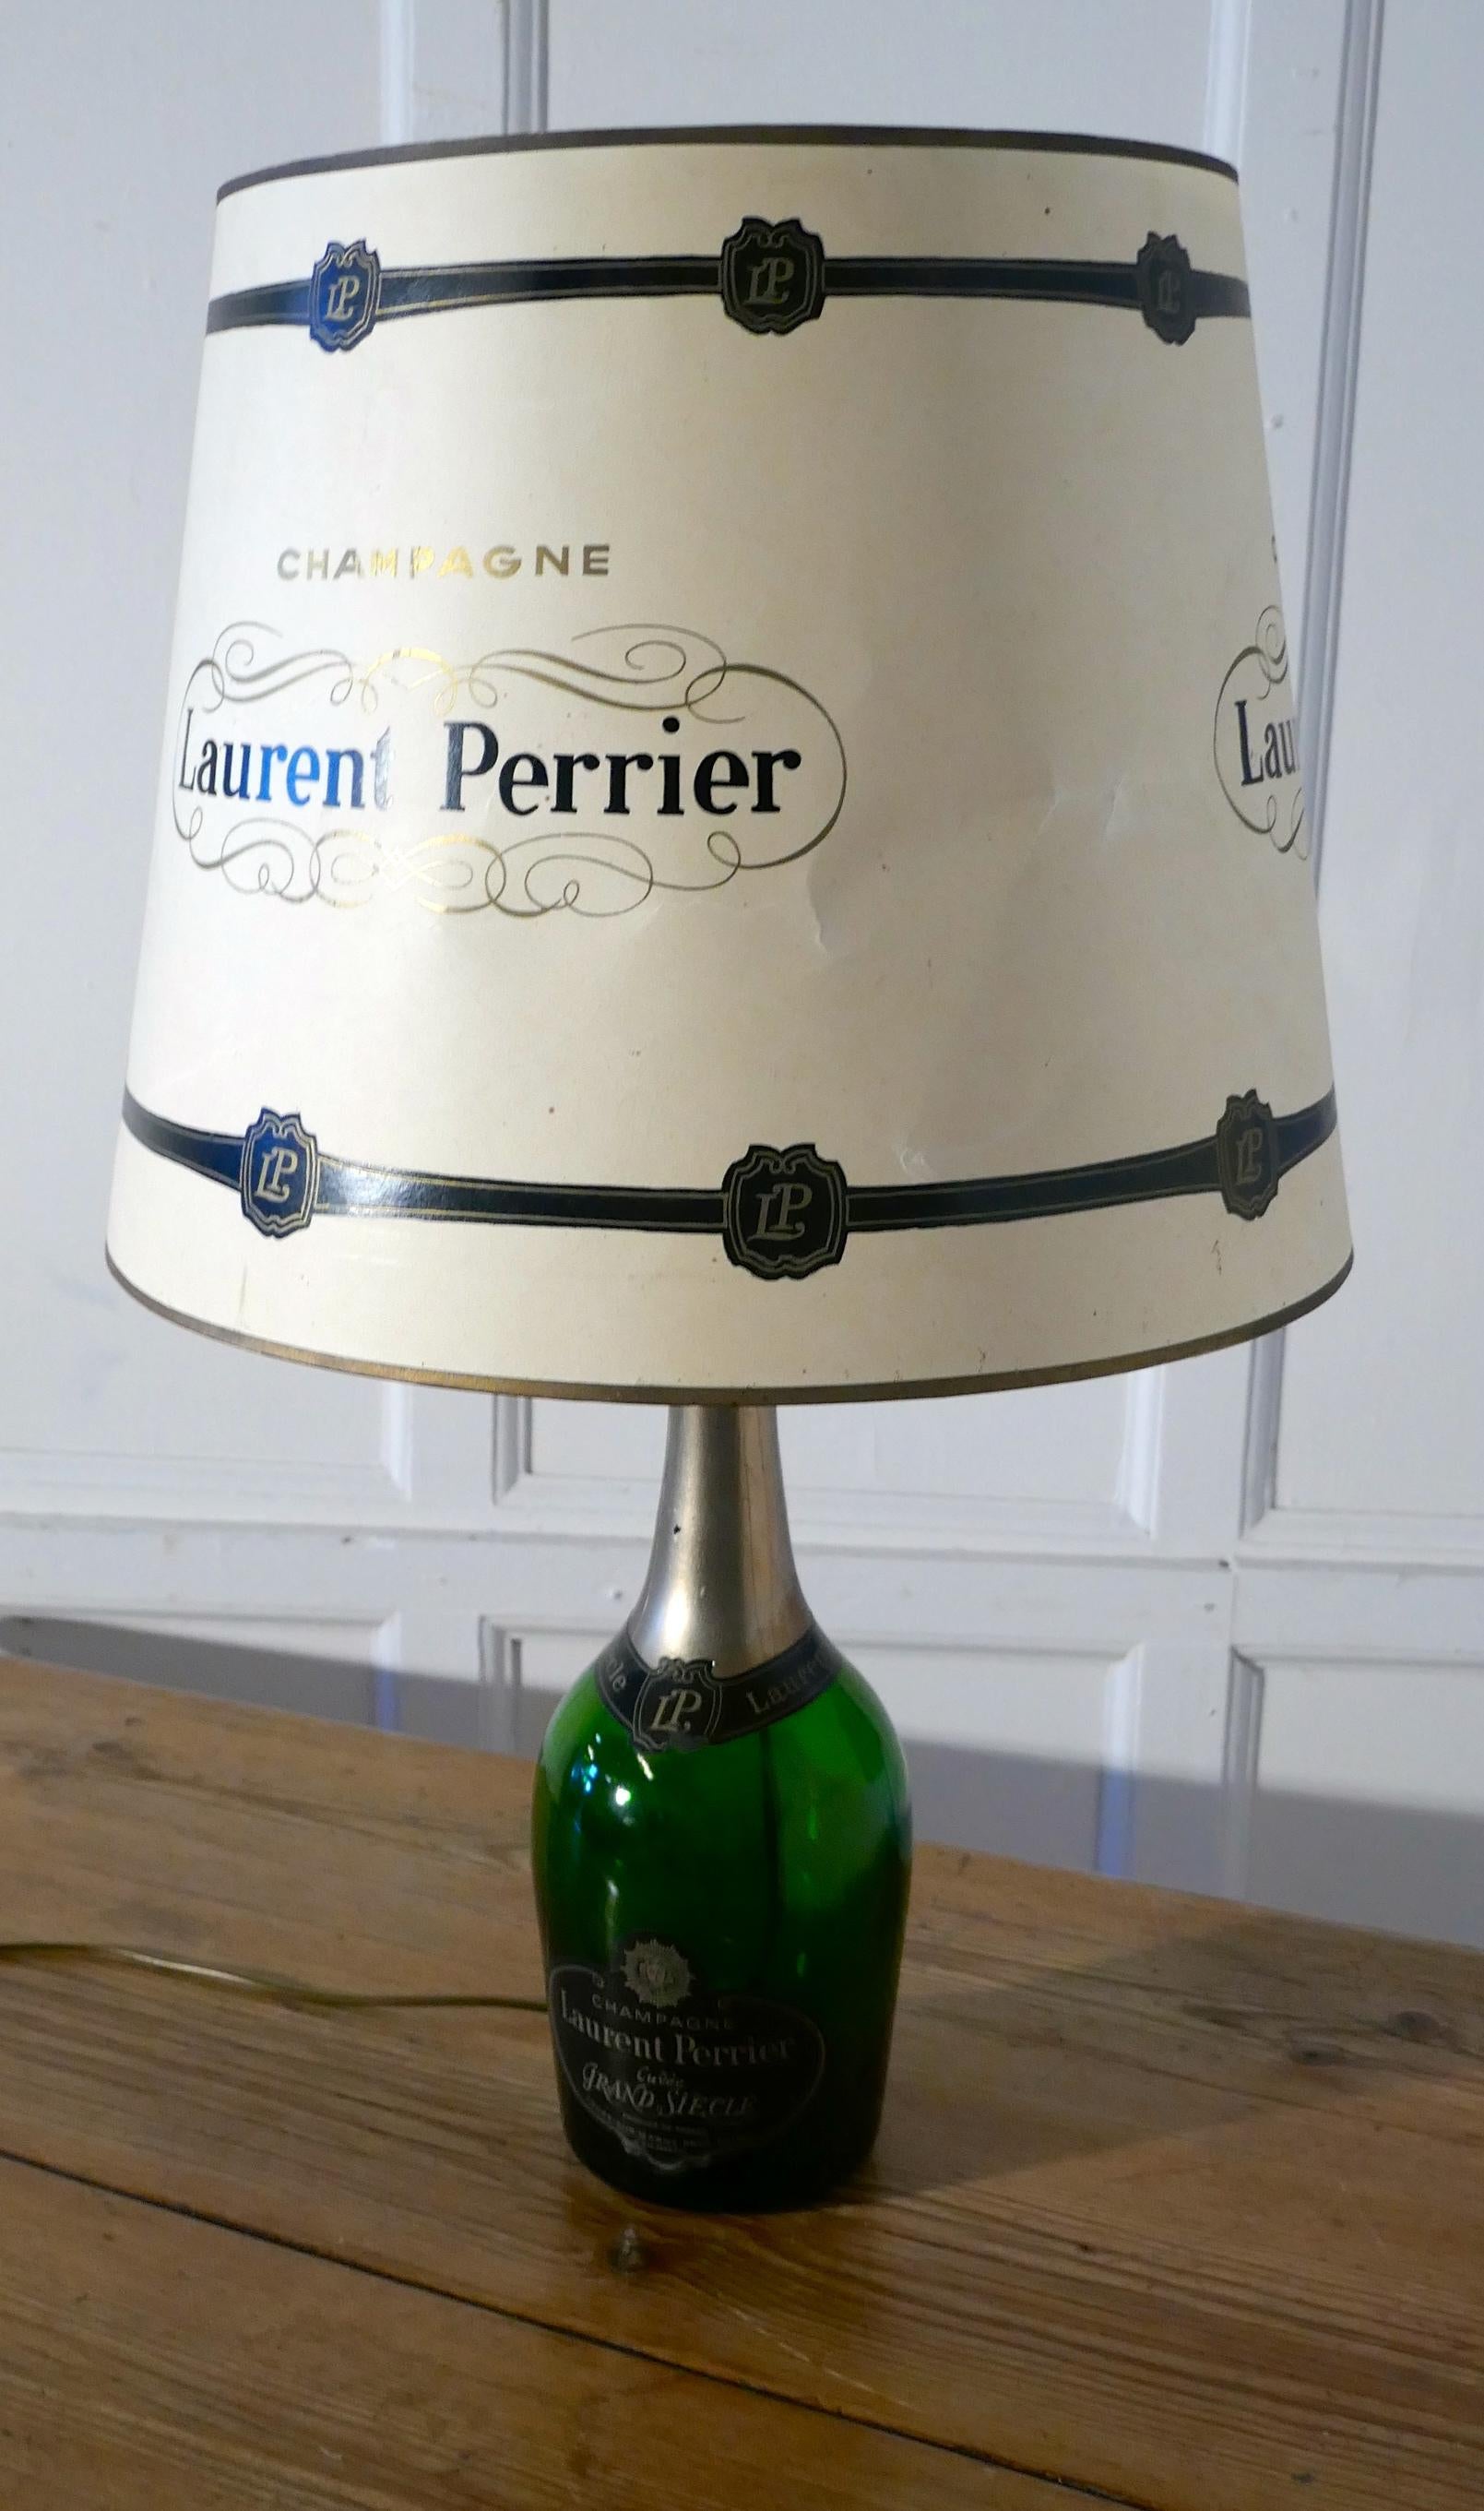 Laurent Perrier Champagne Cuveé Grand Siecle Black Lable advertising table lamp


Fresh from France this superb lamp was part of a Chateau display, it is a genuine 1.5 liter bottle and comes with its original matching parchment shade, decorated